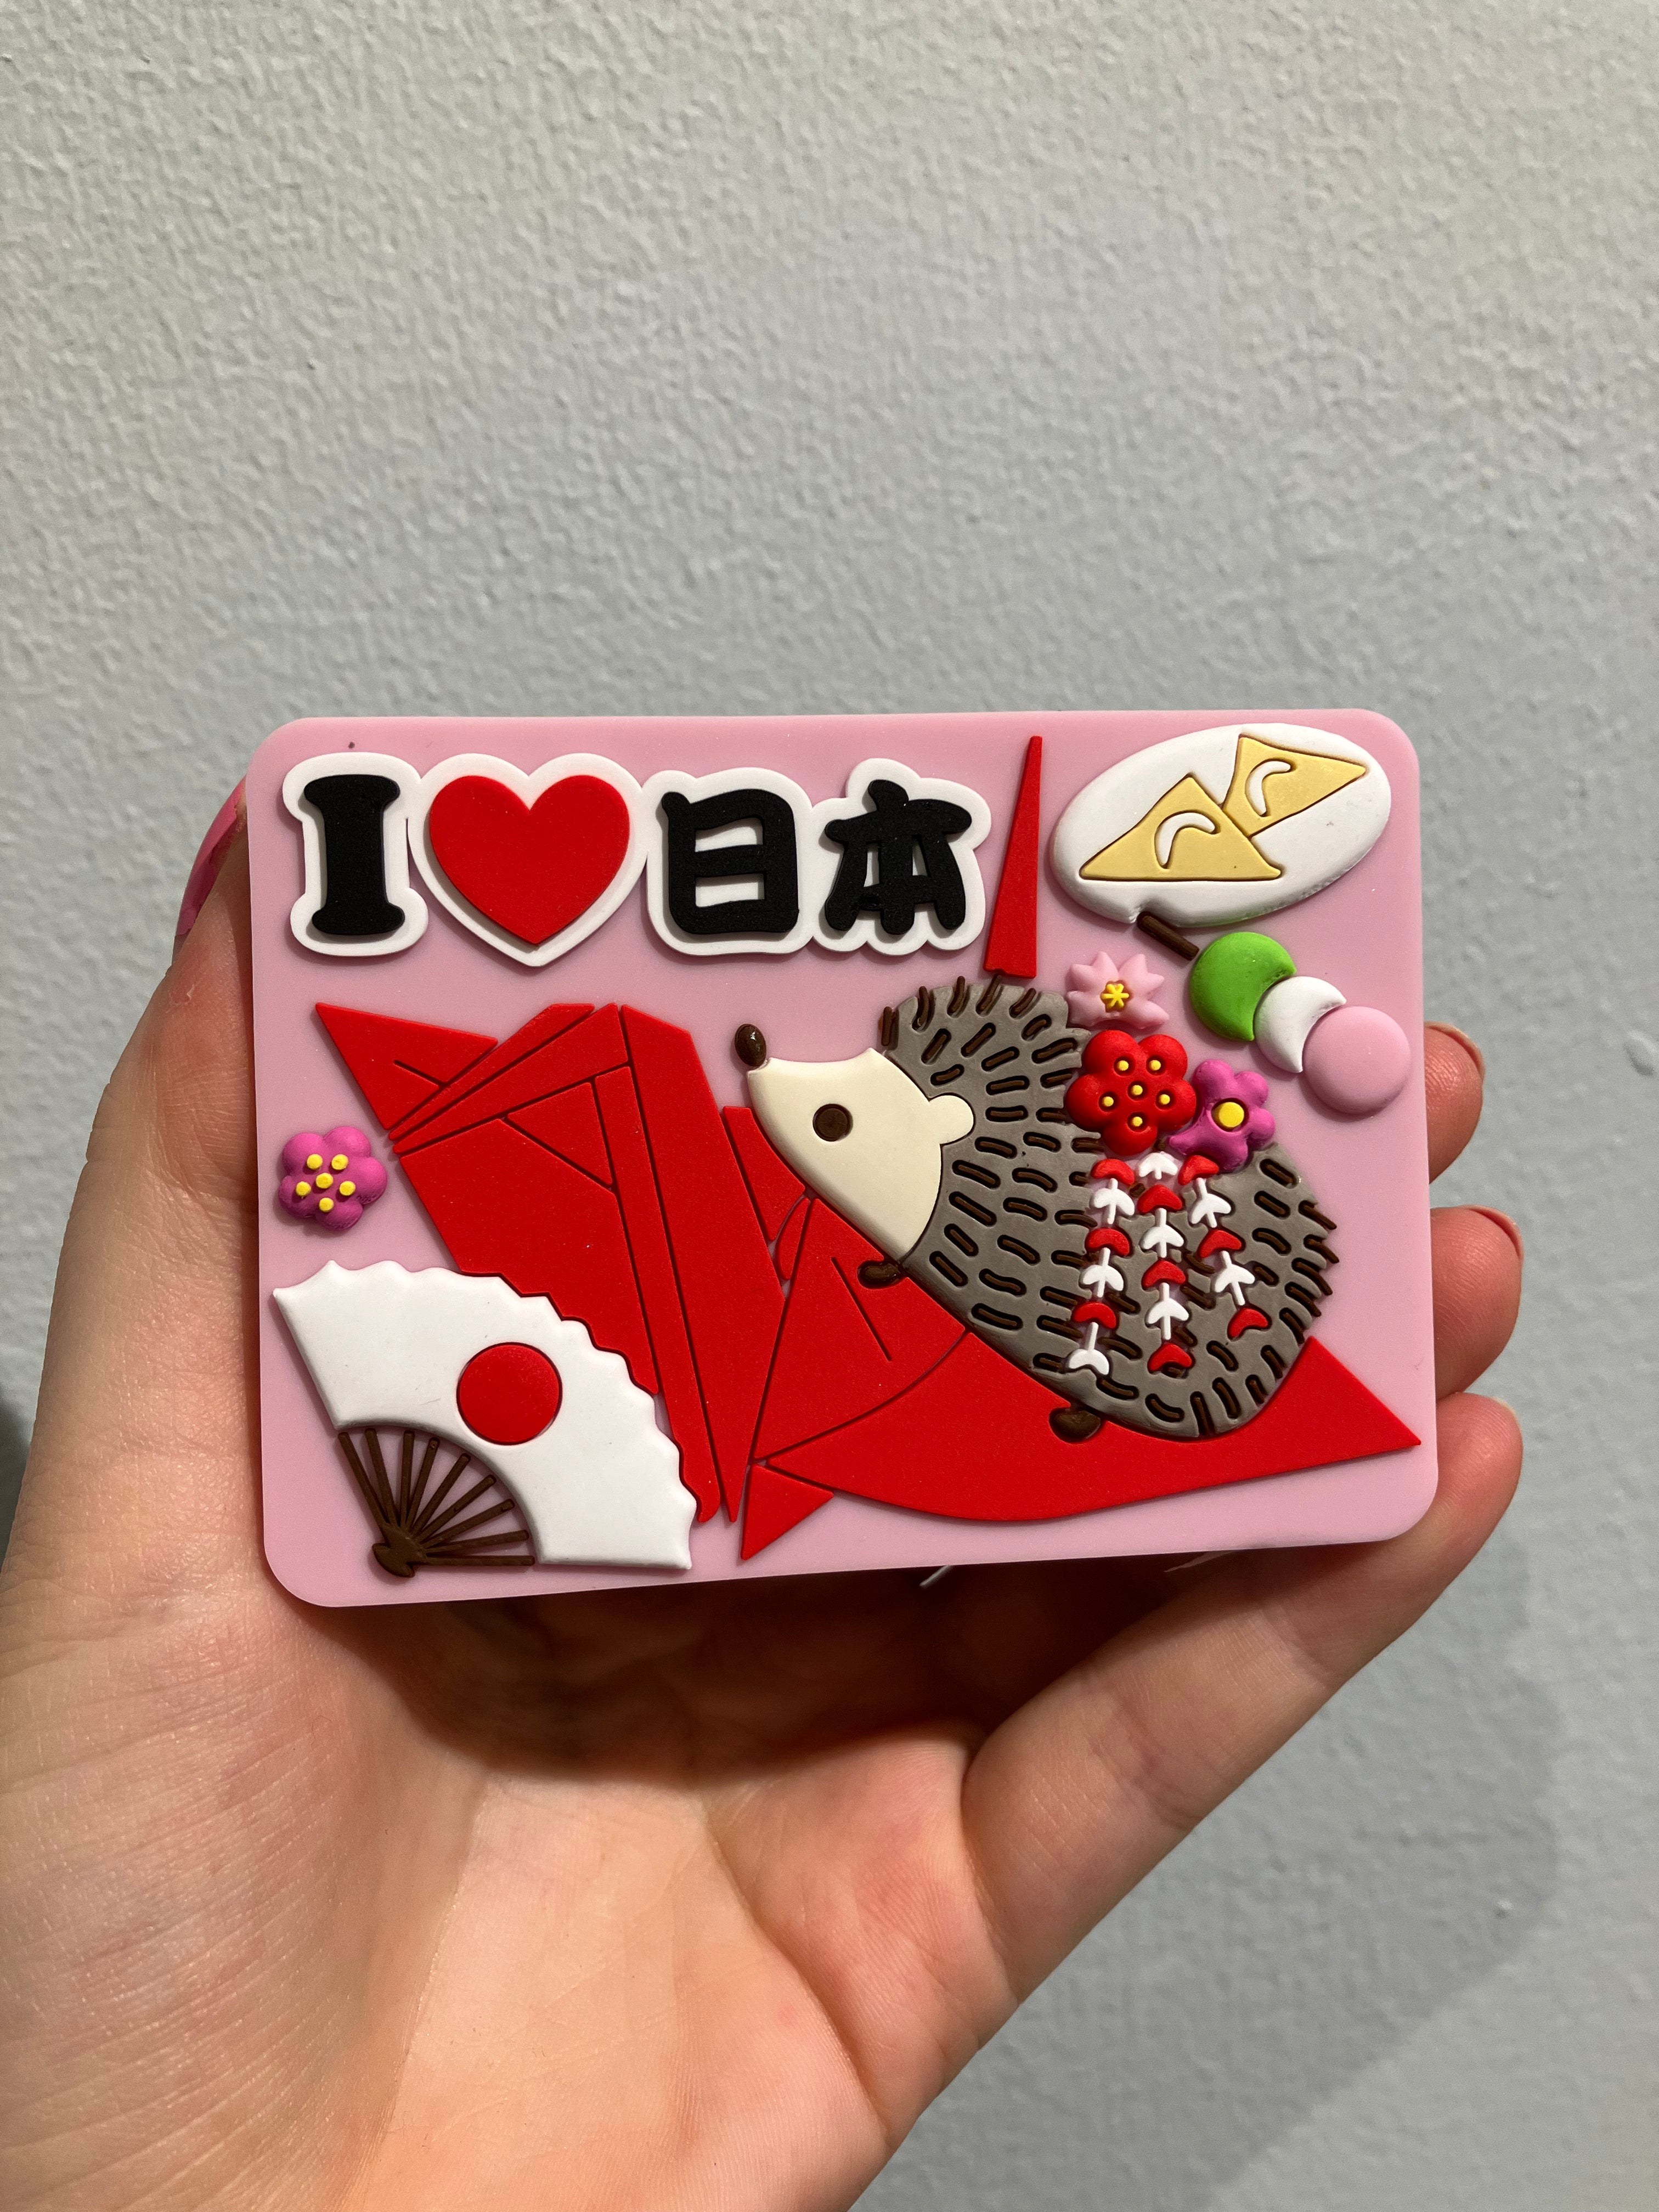 Magnet with Japanese motifs and hedgehogs (I love Japan)